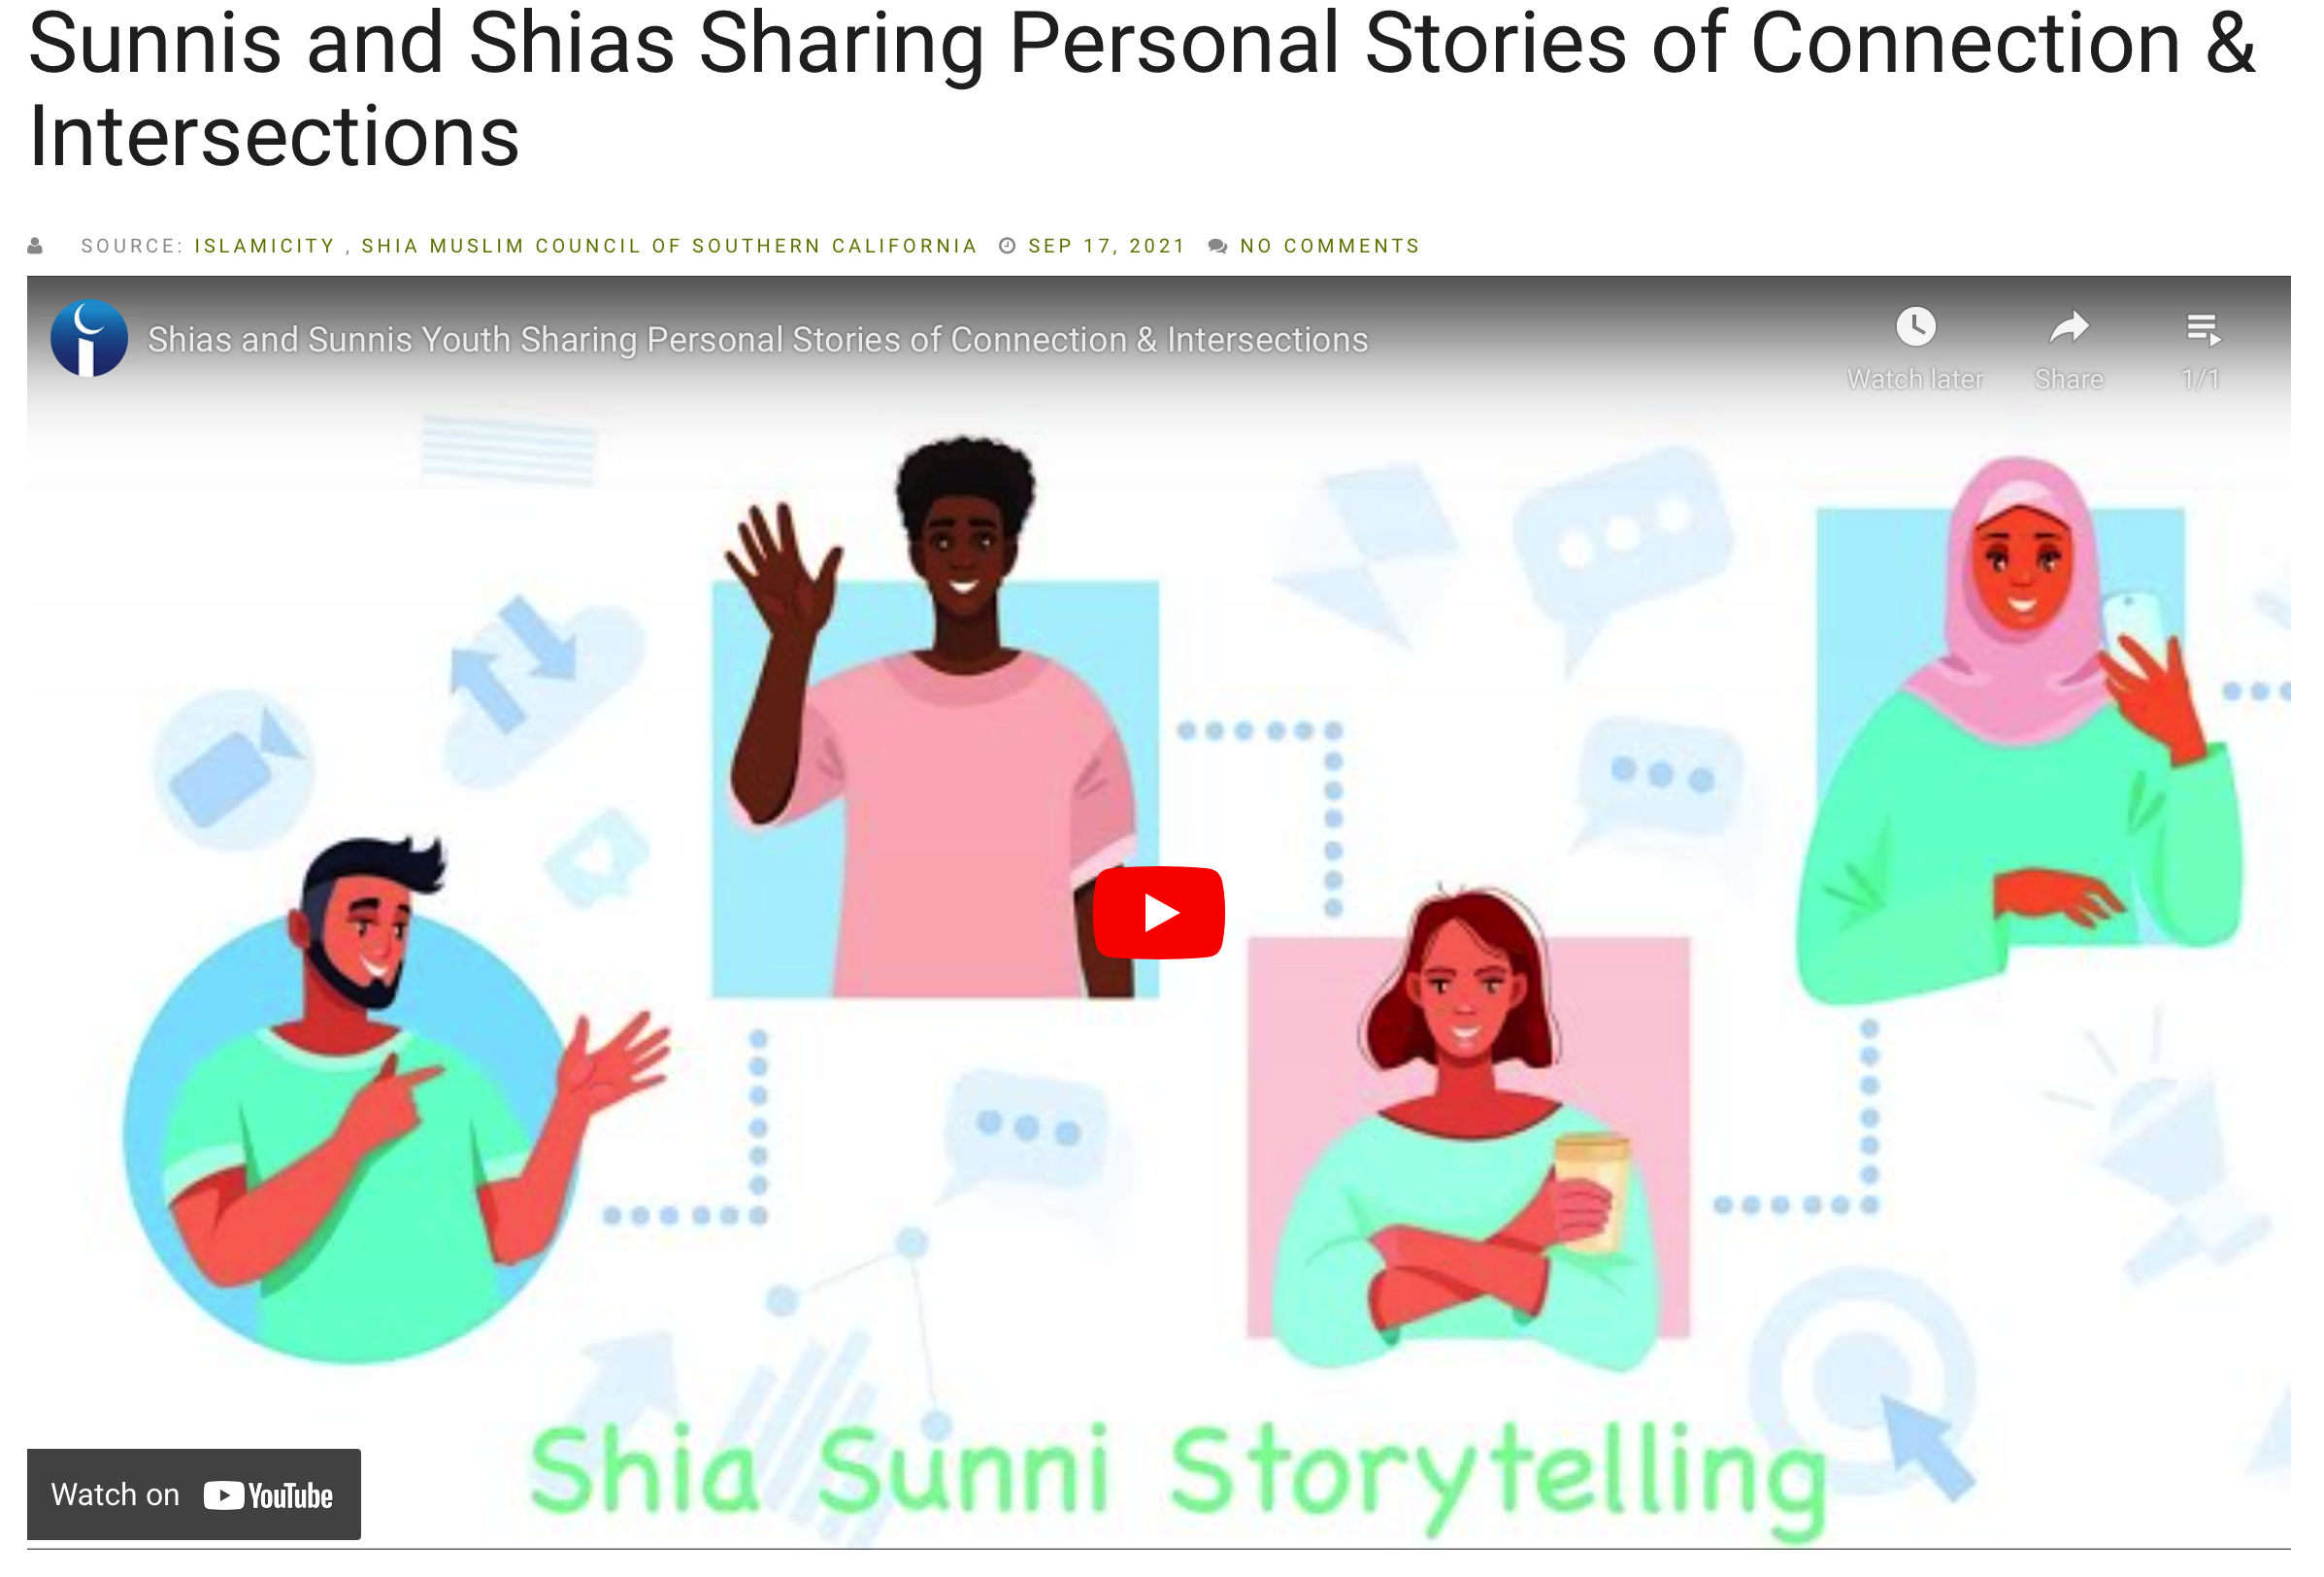 Shias and Sunnis Sharing Personal Stories of Connection & Intersections